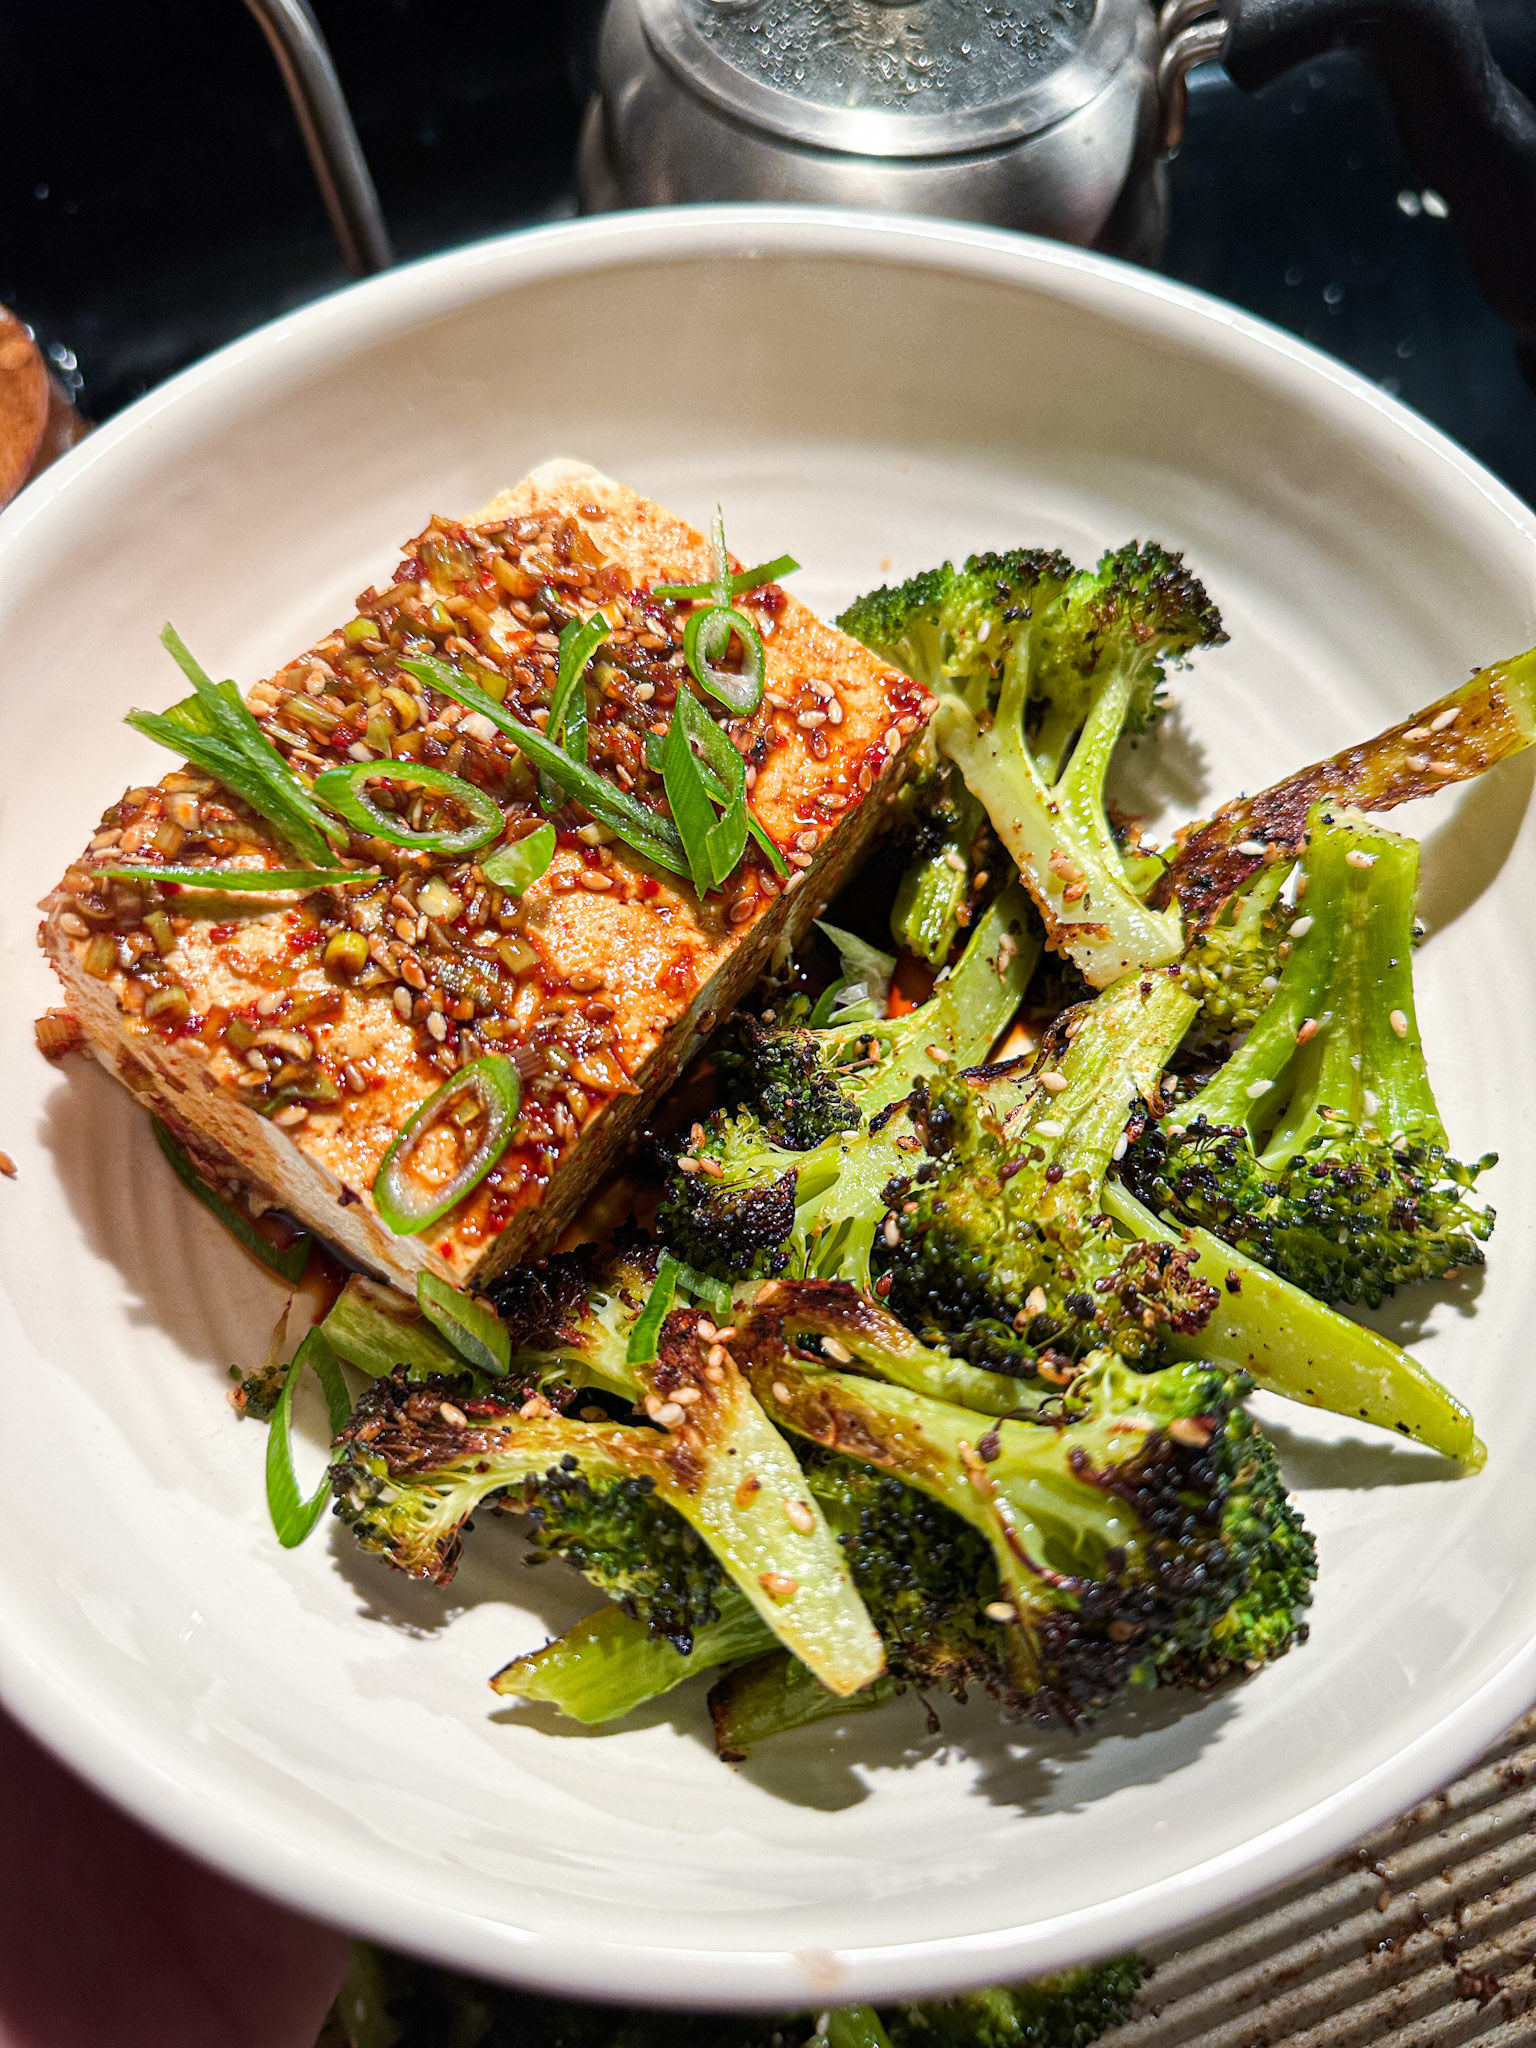 block of tofu next to roasted broccoli, with a brown sauce with sesame seeds drizzled overtop